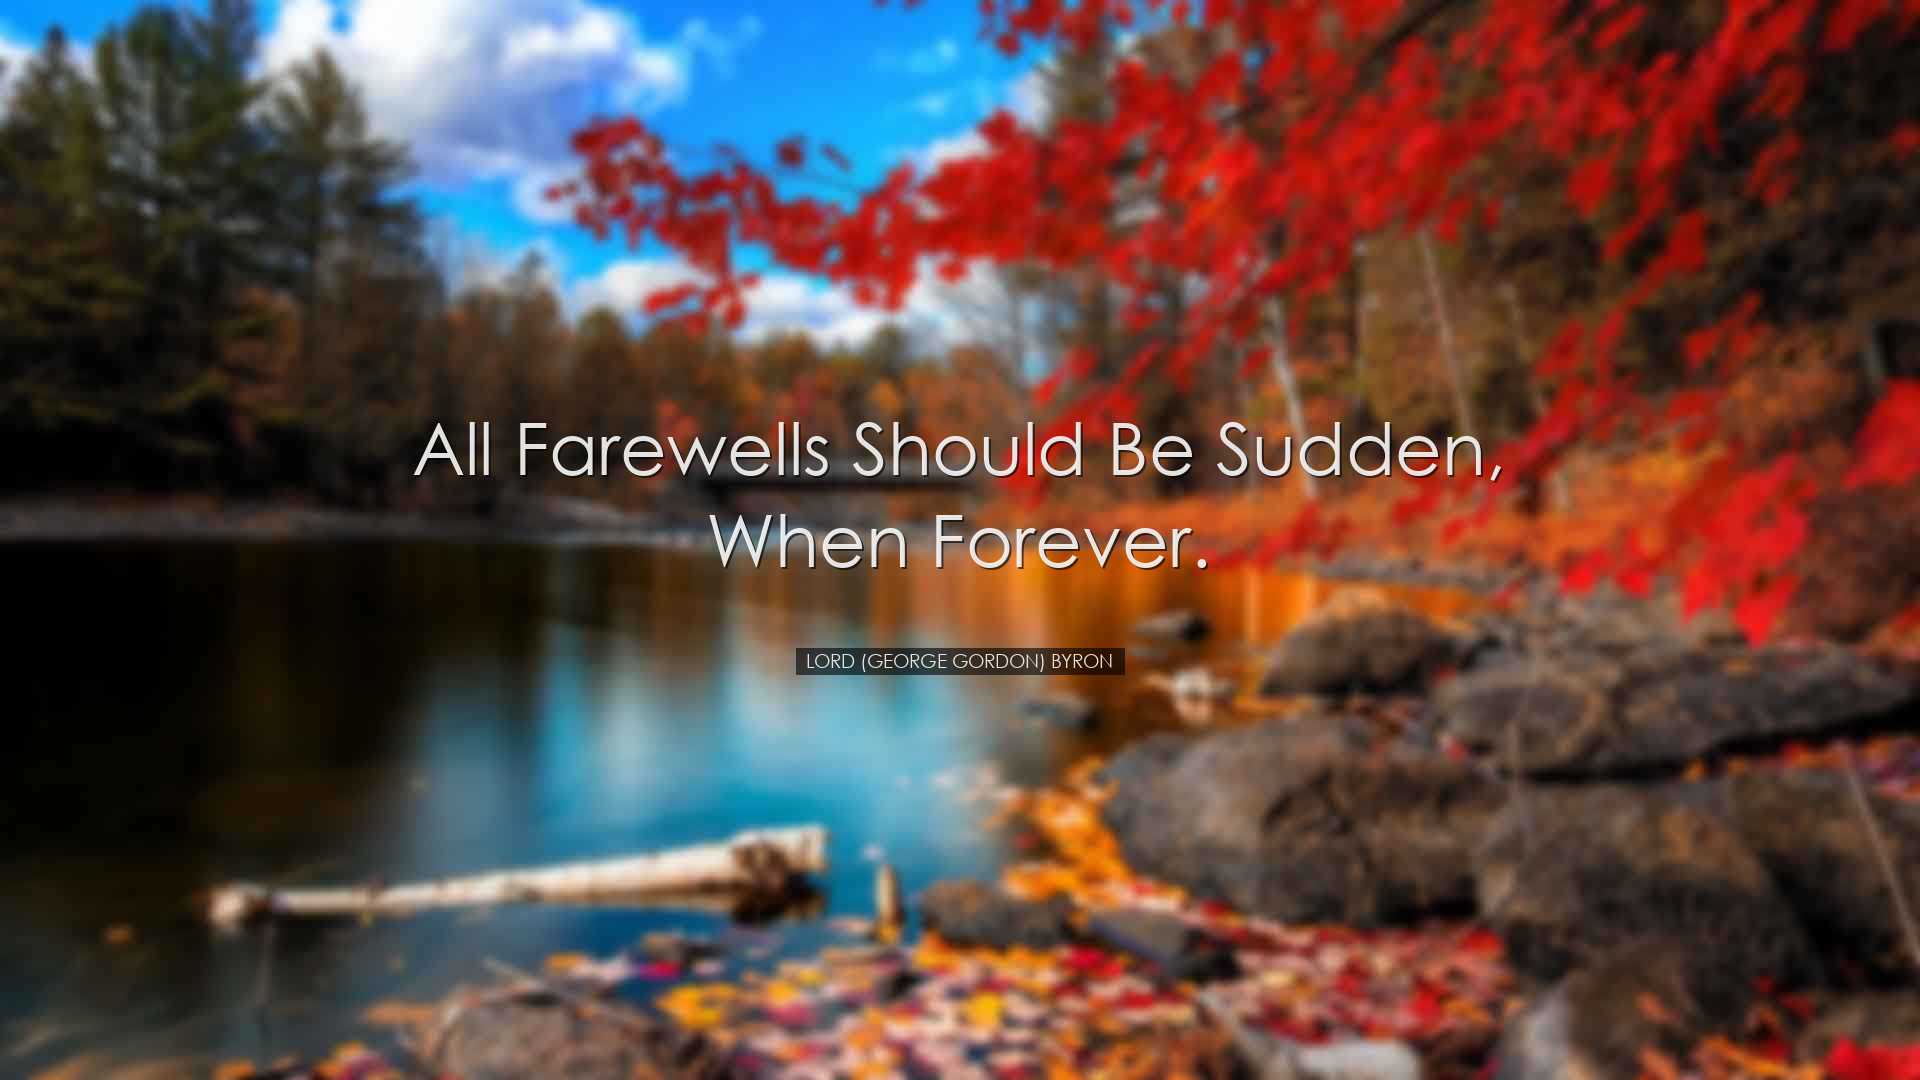 All farewells should be sudden, when forever. - Lord (George Gordo